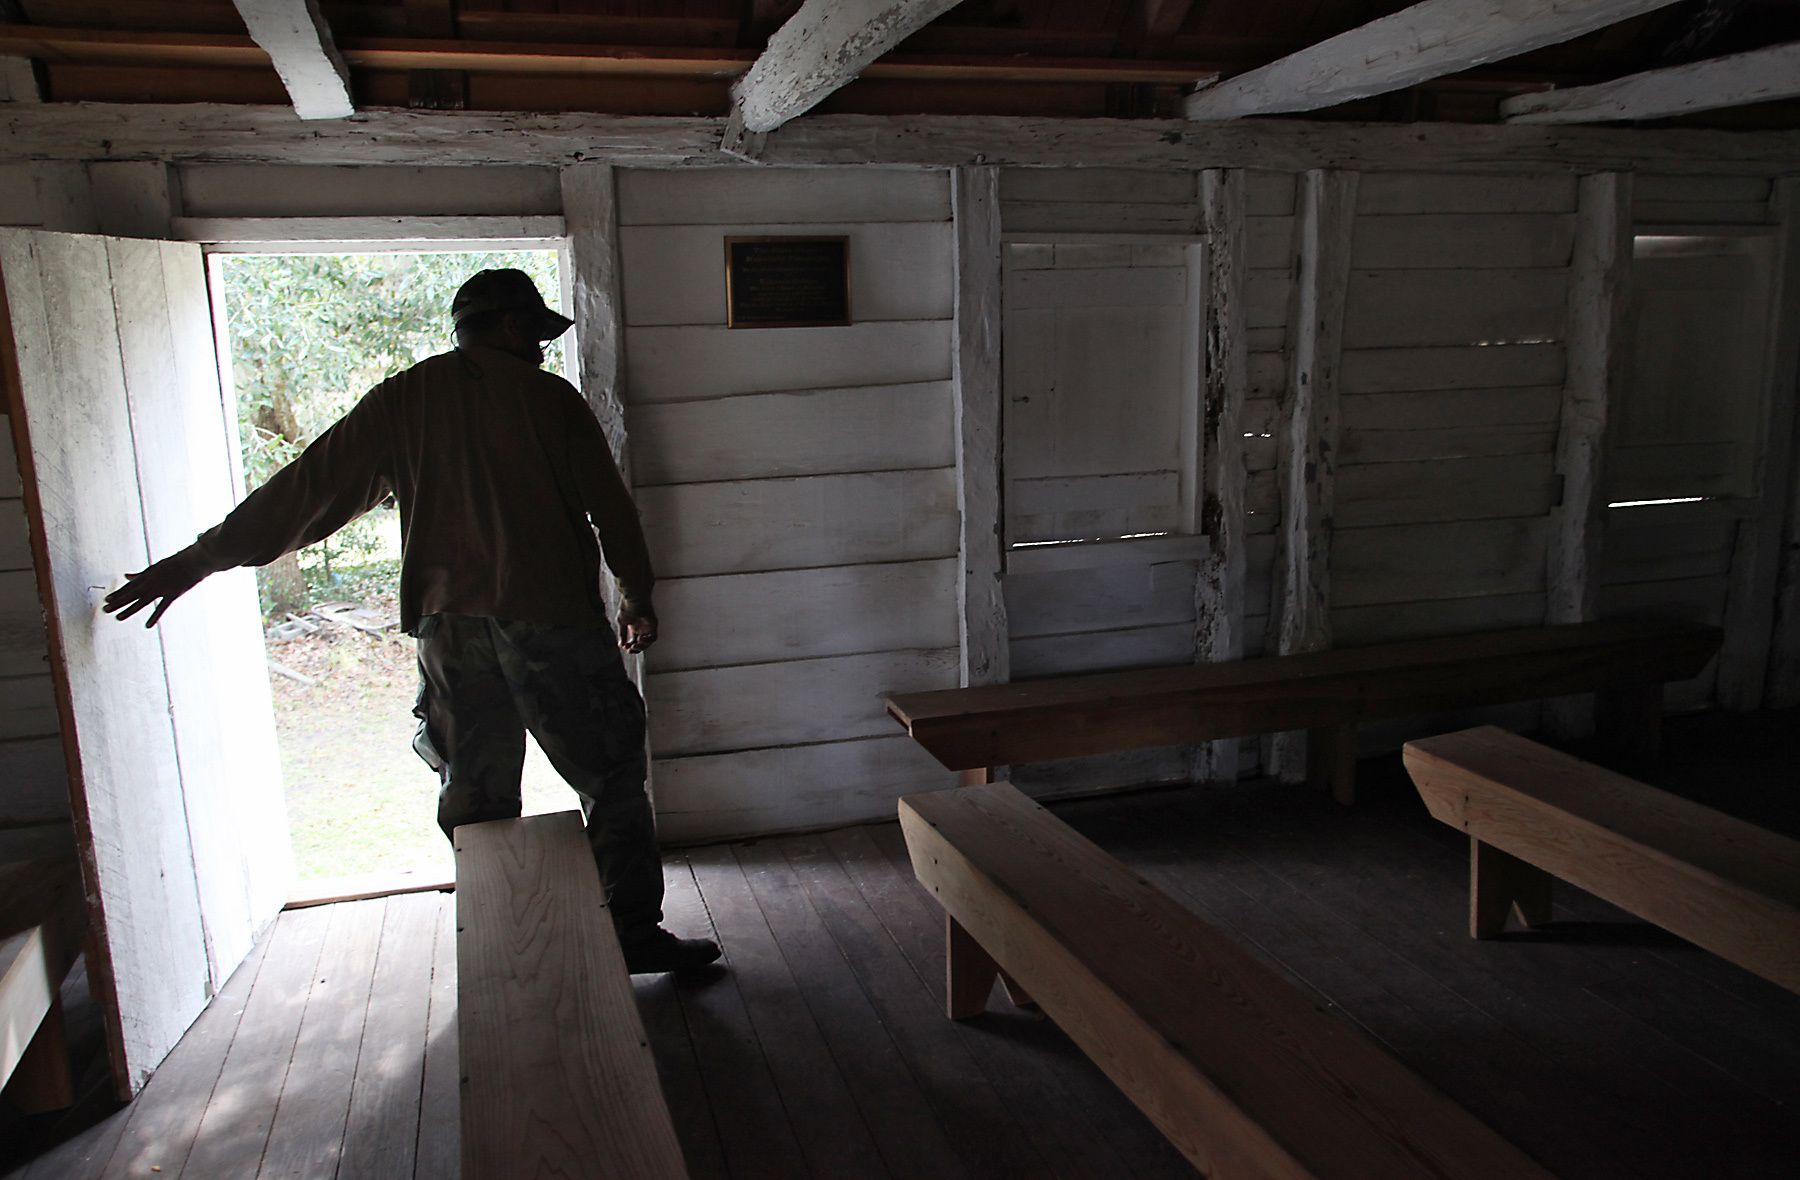 Plantation grounds keeper Cliff Ford walks through the restored slave chapel February 23, 2012, at Mansfield Plantation in Georgetown, S.C. The chapel was restored in 2006 by current owner John Parker of Asheville, N.C. Ford claims he has at times felt the spirits of the slaves who worshiped at the chapel. {quote}I think they are happy we are taking care of their church,{quote} he said. {quote}It leaves me with a good feeling.{quote} The plantation is a National Historic Landmark consisting of 893 acres located on Black River in Georgetown County. In the South Carolina Lowcountry, more than a half-dozen antebellum plantations, which don't change hands often, are for sale. REUTERS/Randall Hill